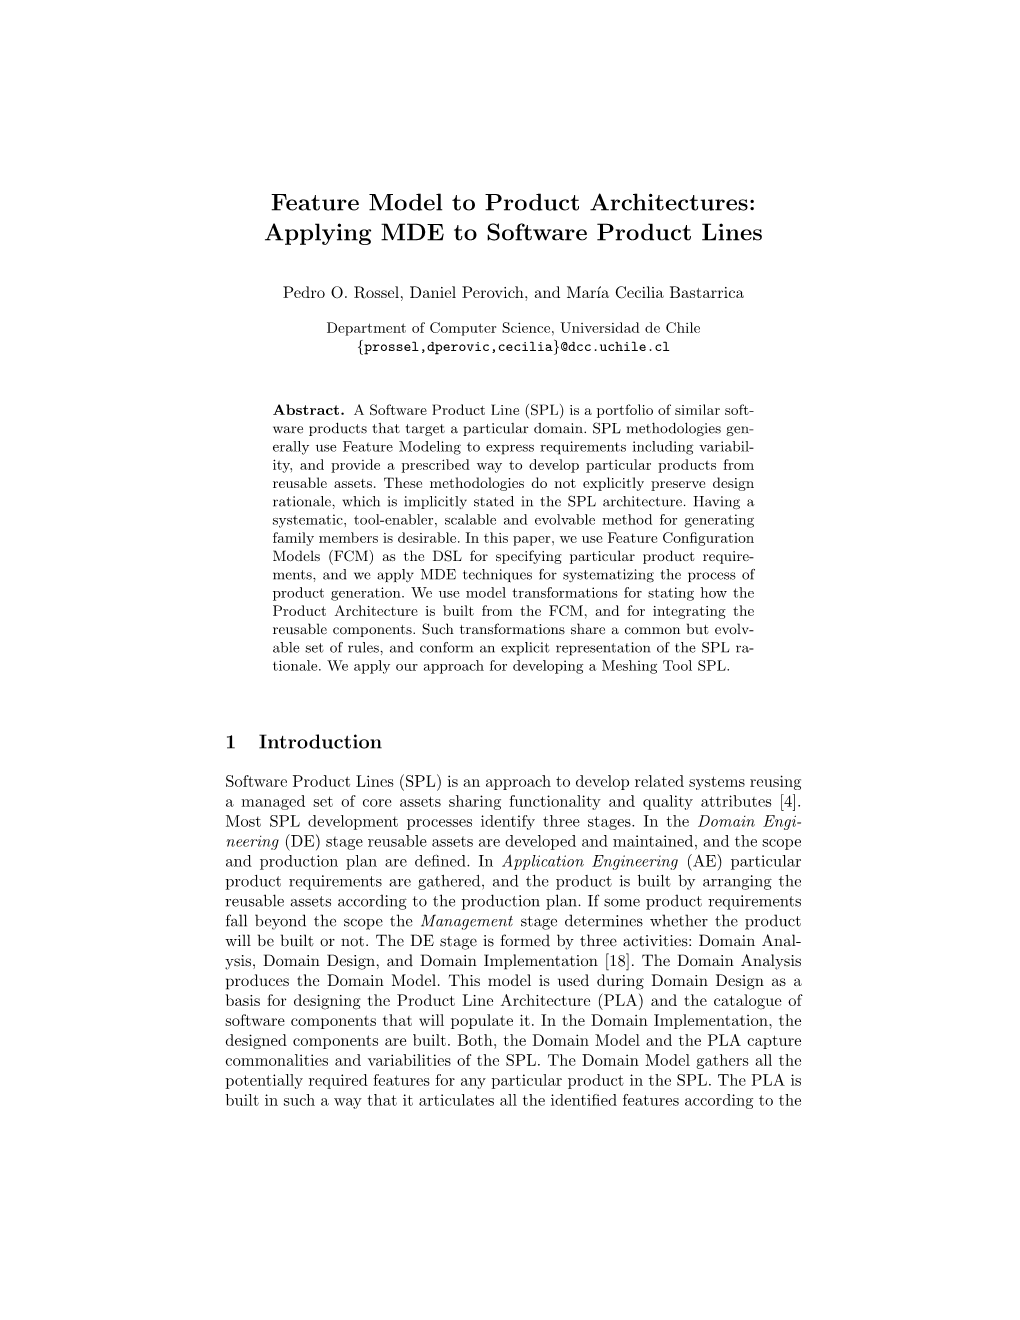 Feature Model to Product Architectures: Applying MDE to Software Product Lines